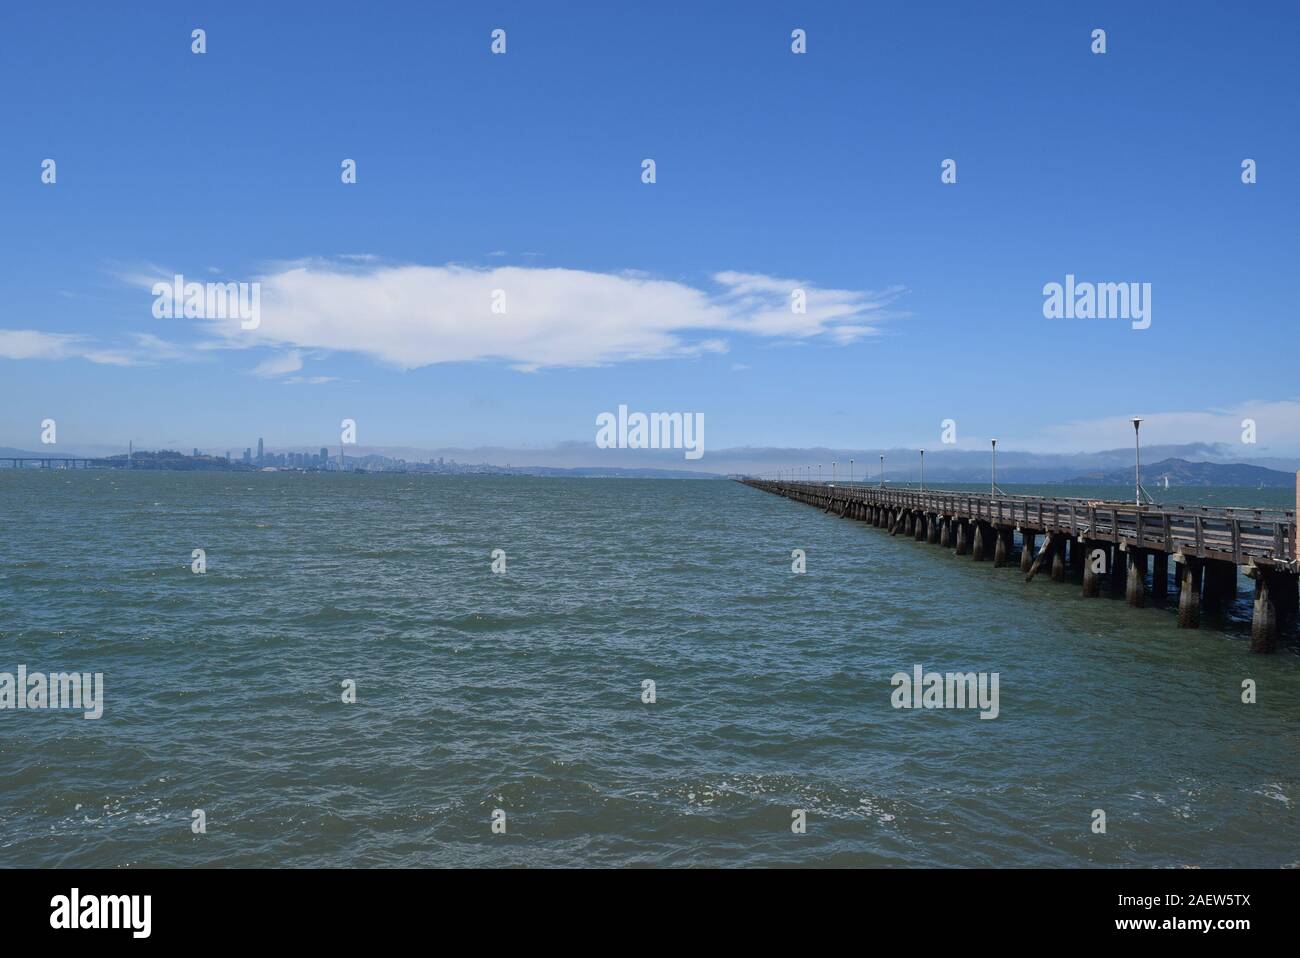 View to the Golden Gate taken from Berkeley Pier in the San Francisco Bay.  The city of San Francisco can be seen in the distance at left. Stock Photo